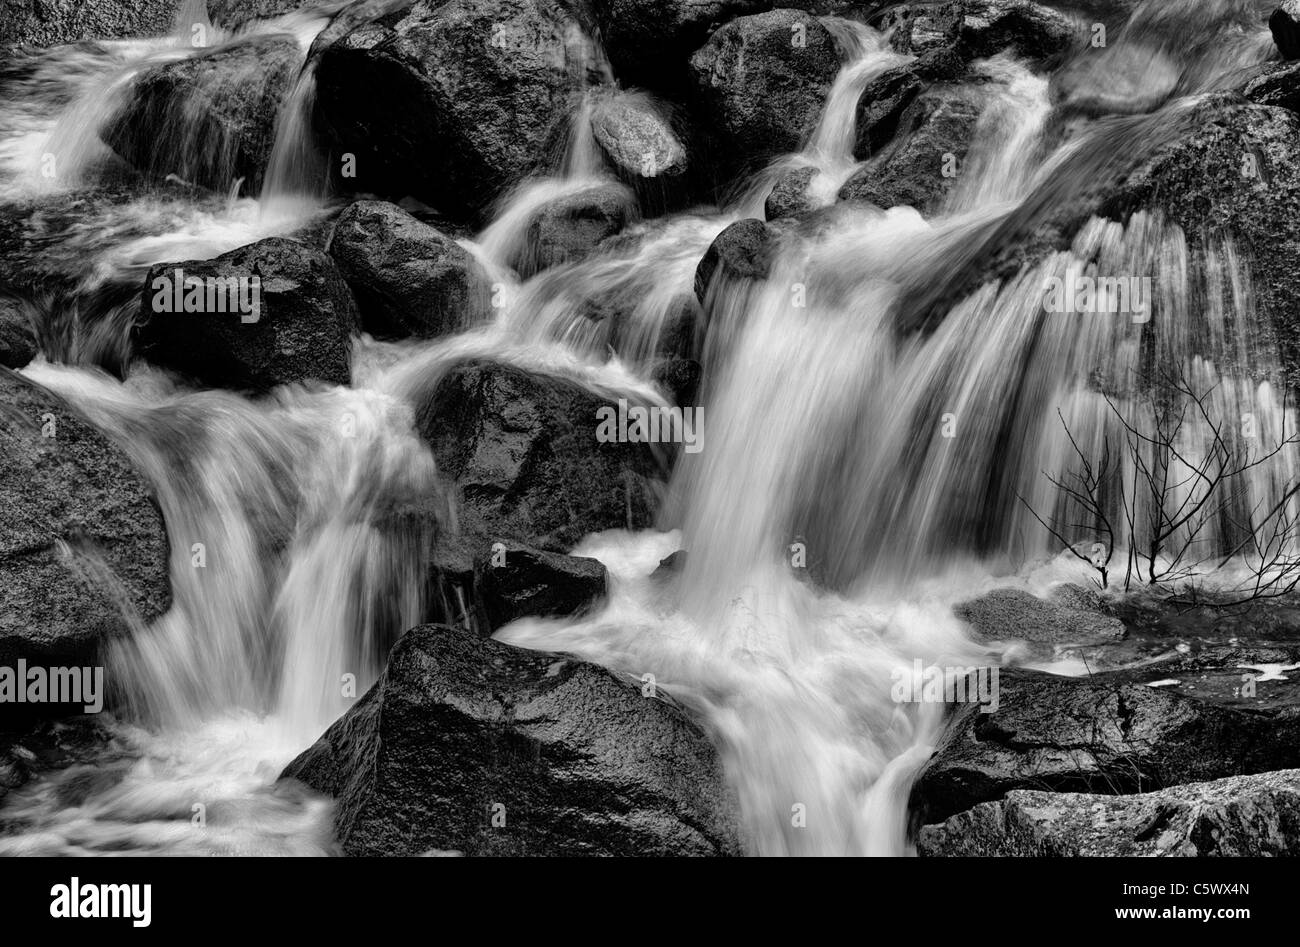 Black and white soft focus cascading water over large rocks Stock Photo